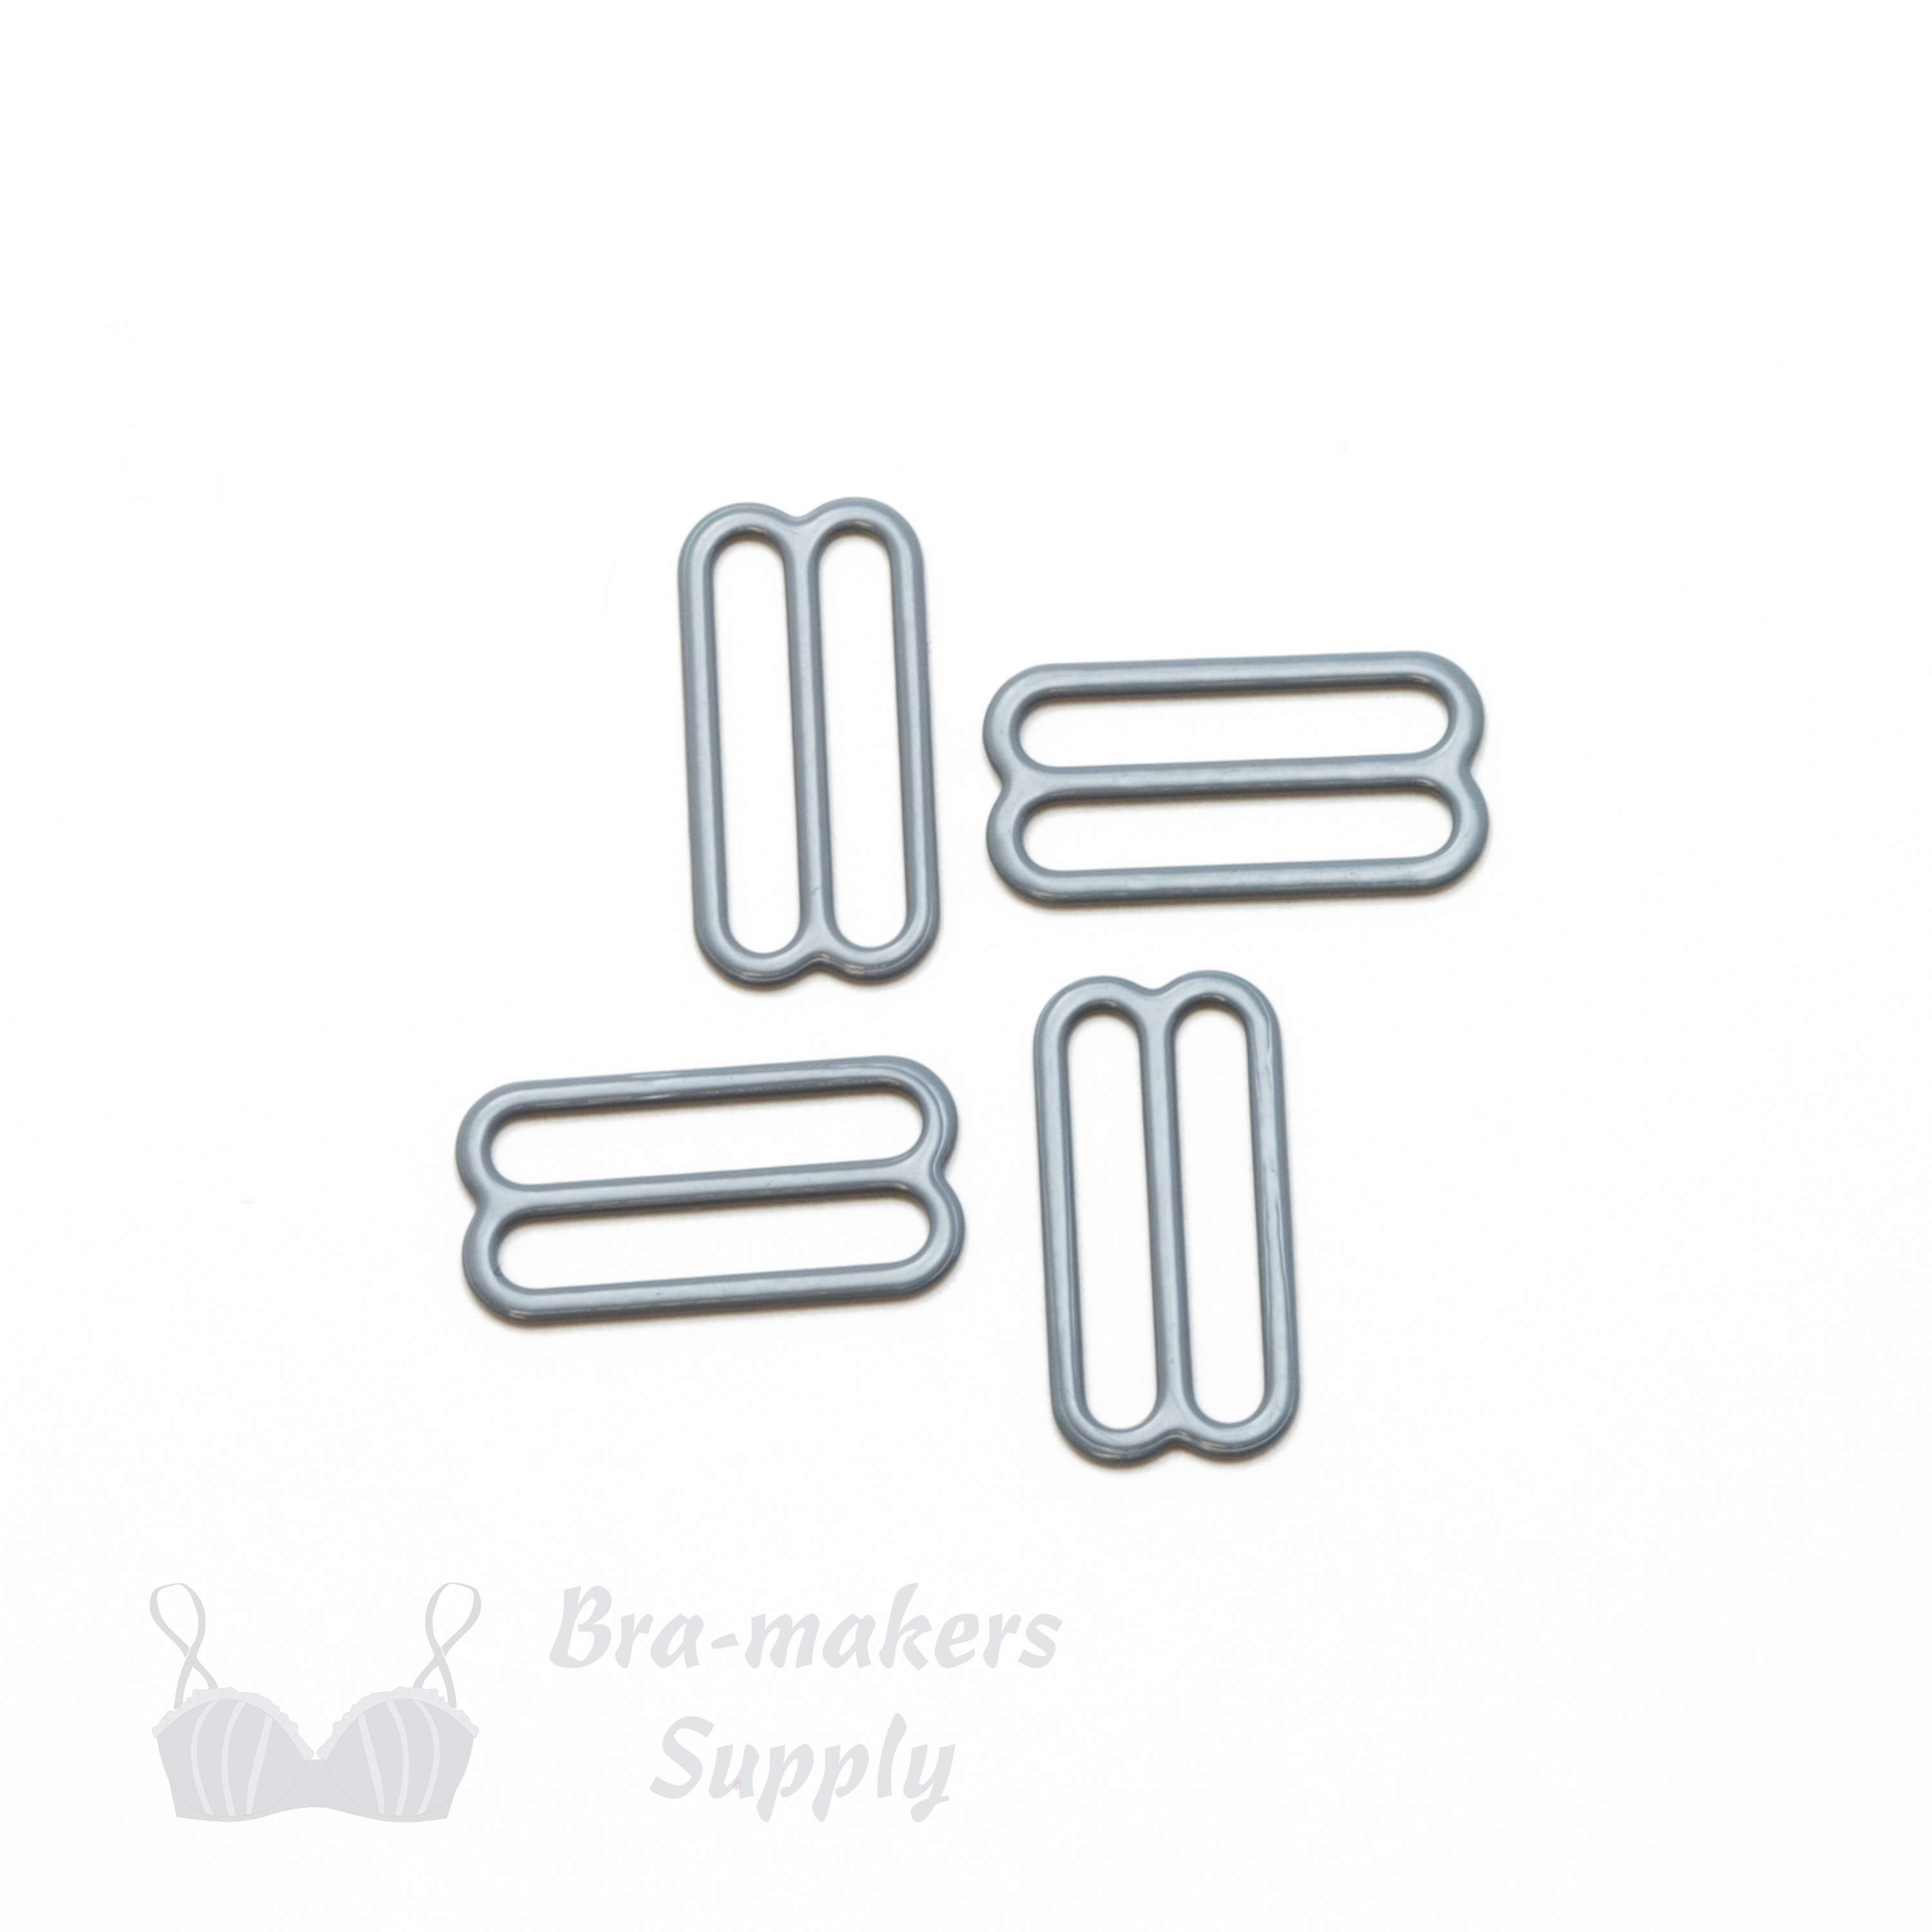 three quarters inch 19mm RM-60 S PK4 platinum nylon coated metal rings sliders or griffin Pantone 17-5102 from Bra-Makers Supply 4 sliders shown